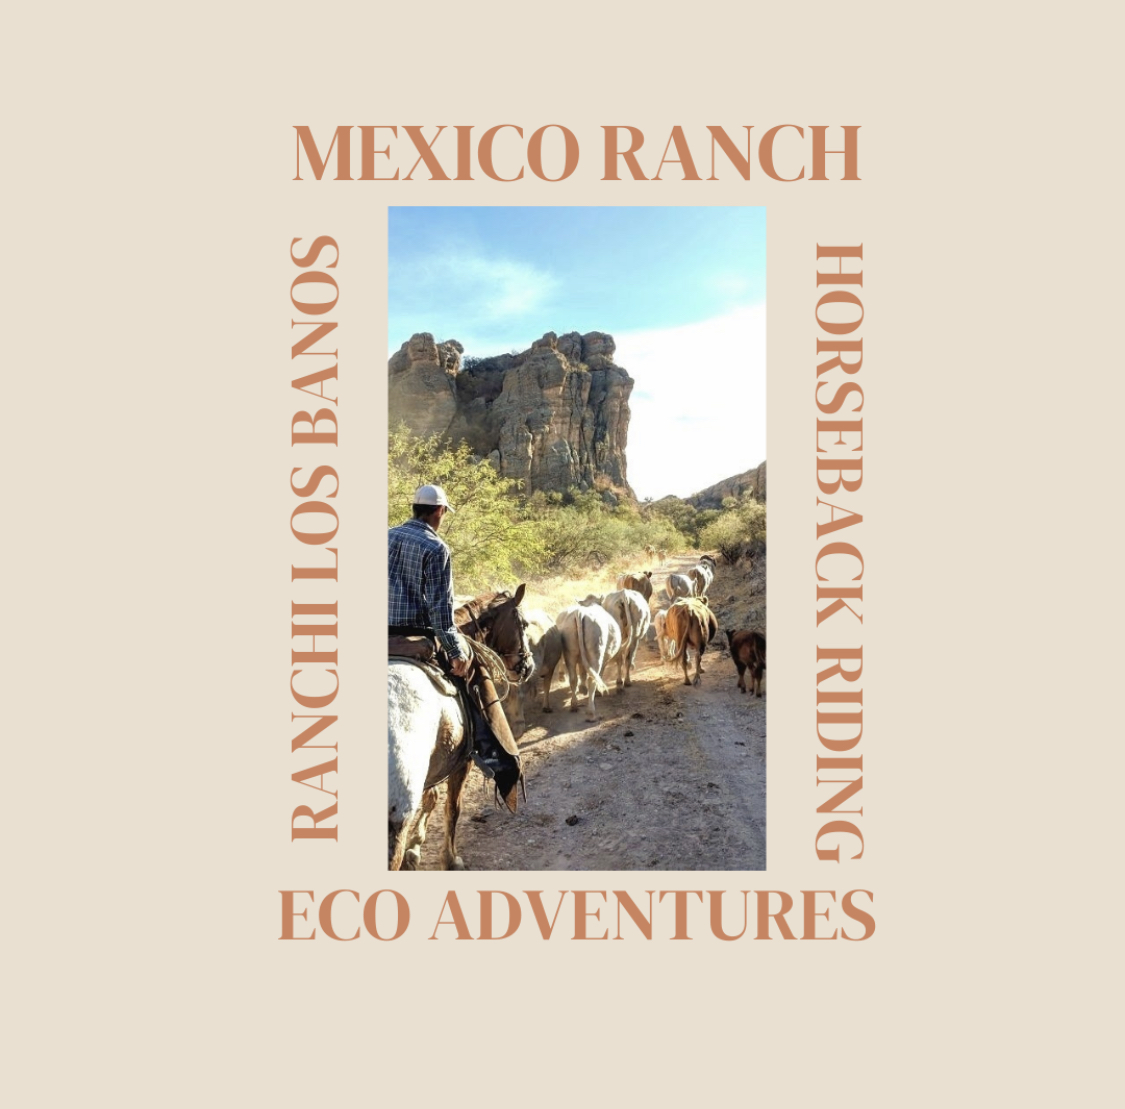 Mexican ranch